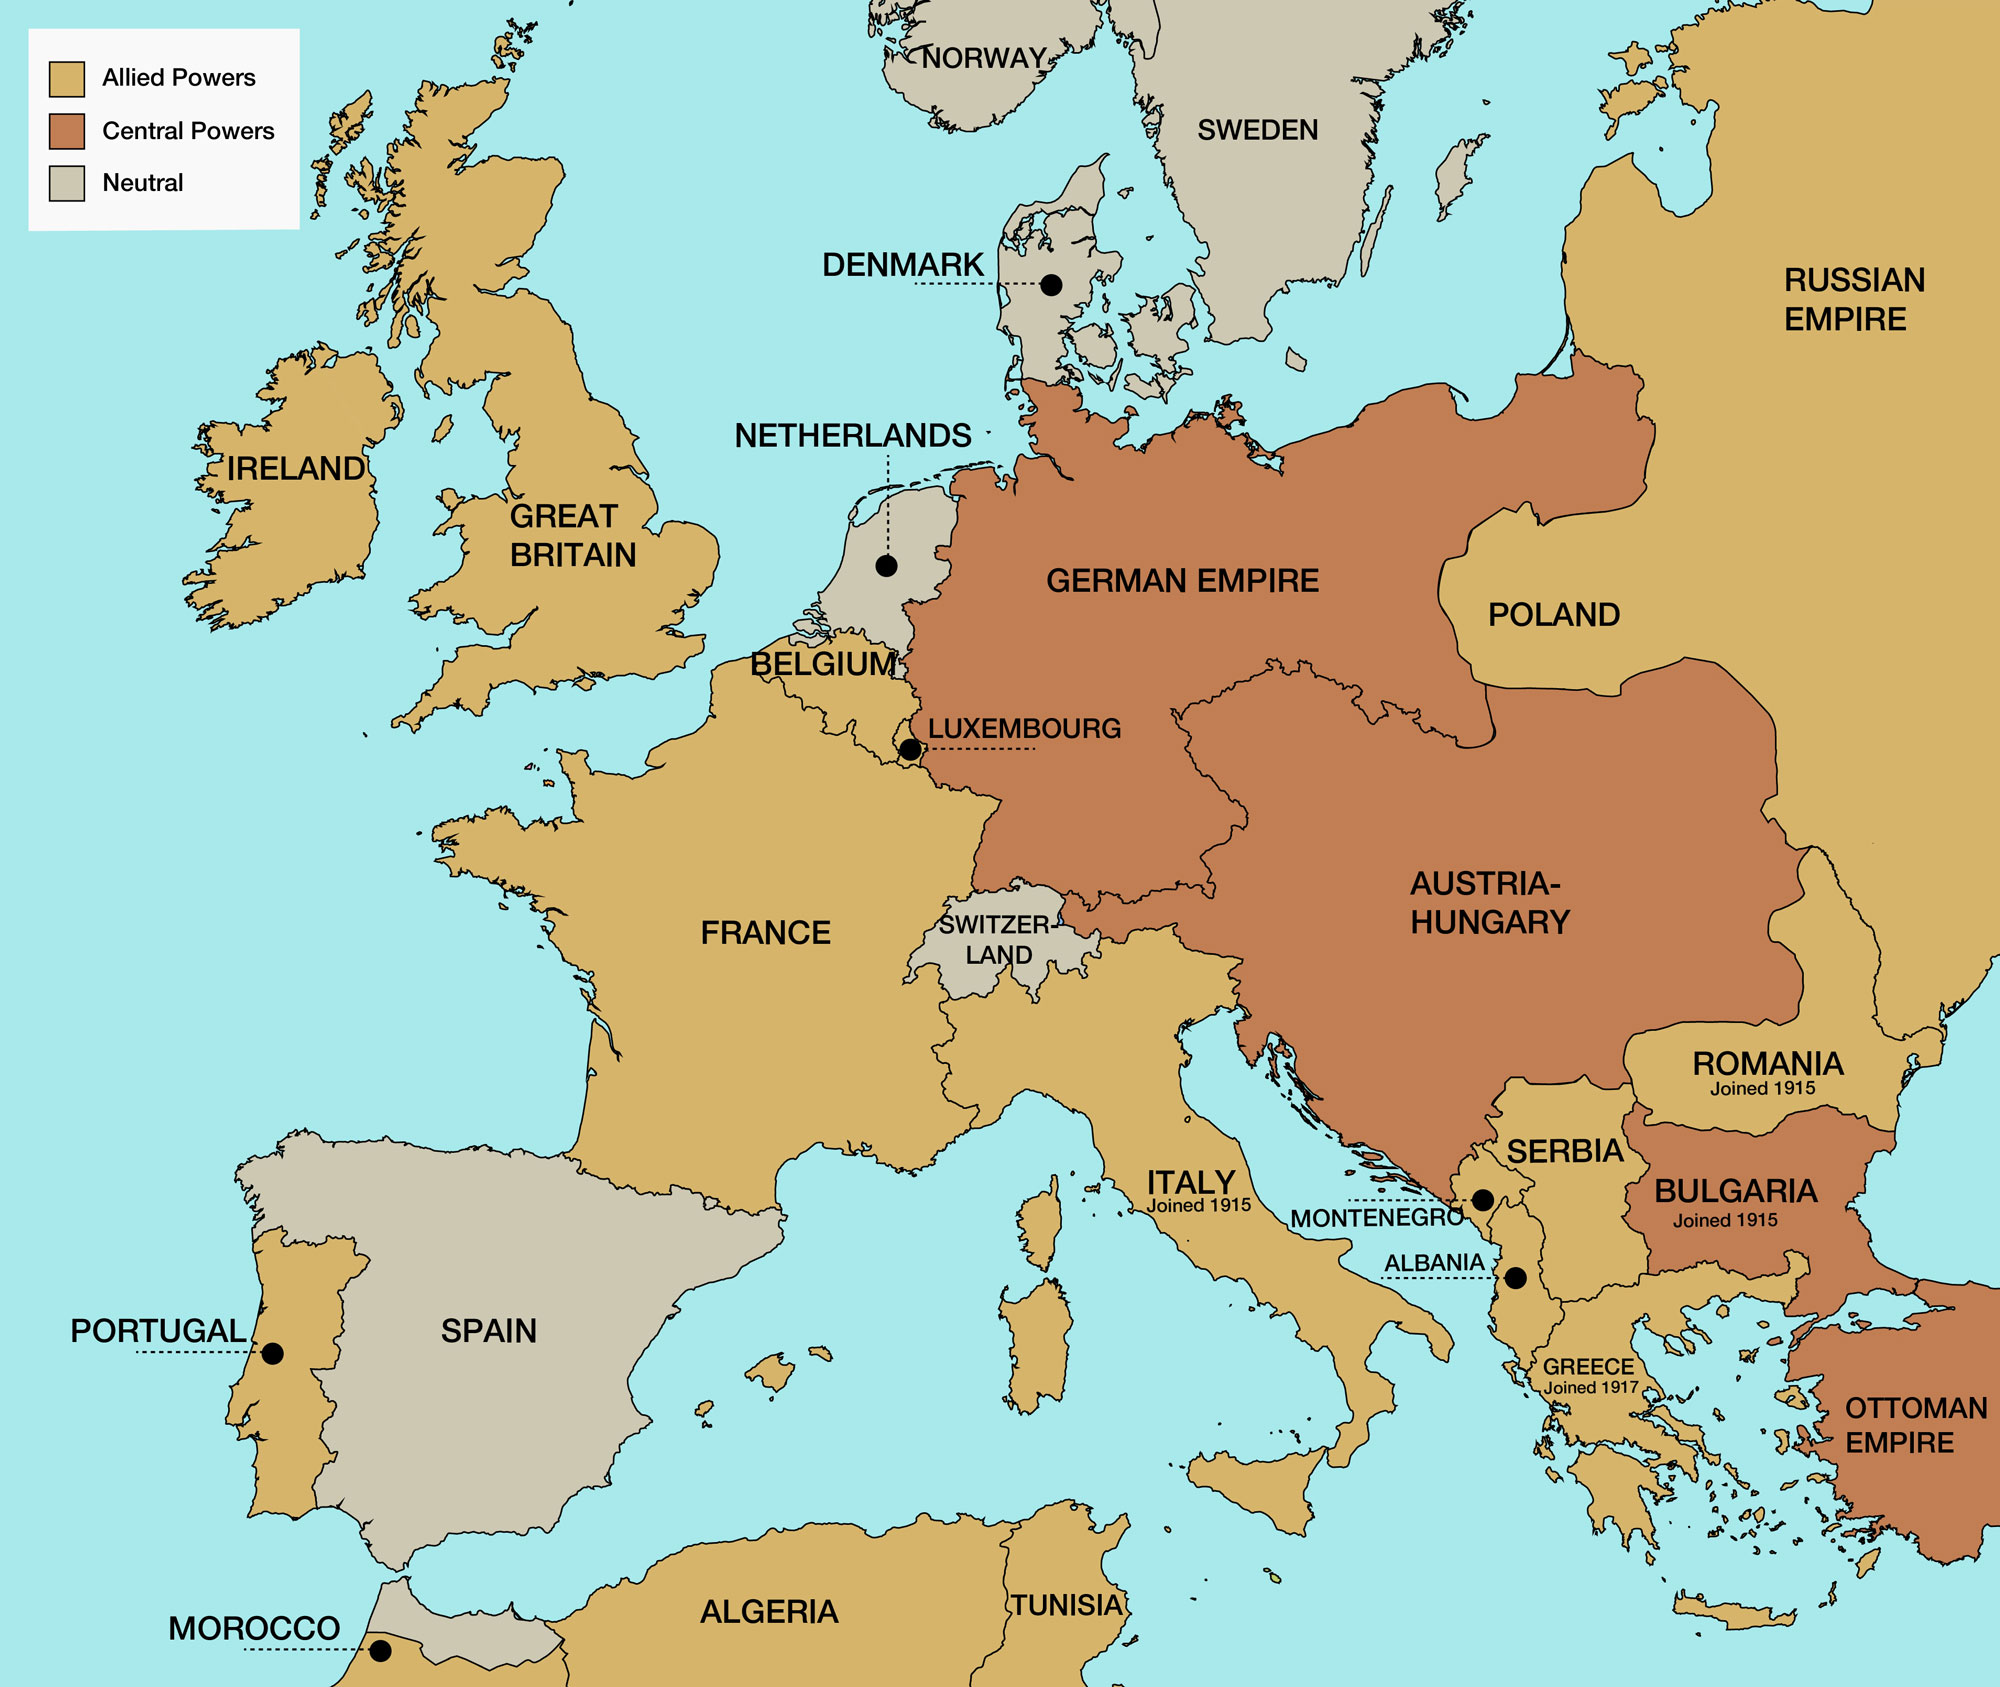 Europe Map 1914 Allied Powers Map Showing First World War Alliances